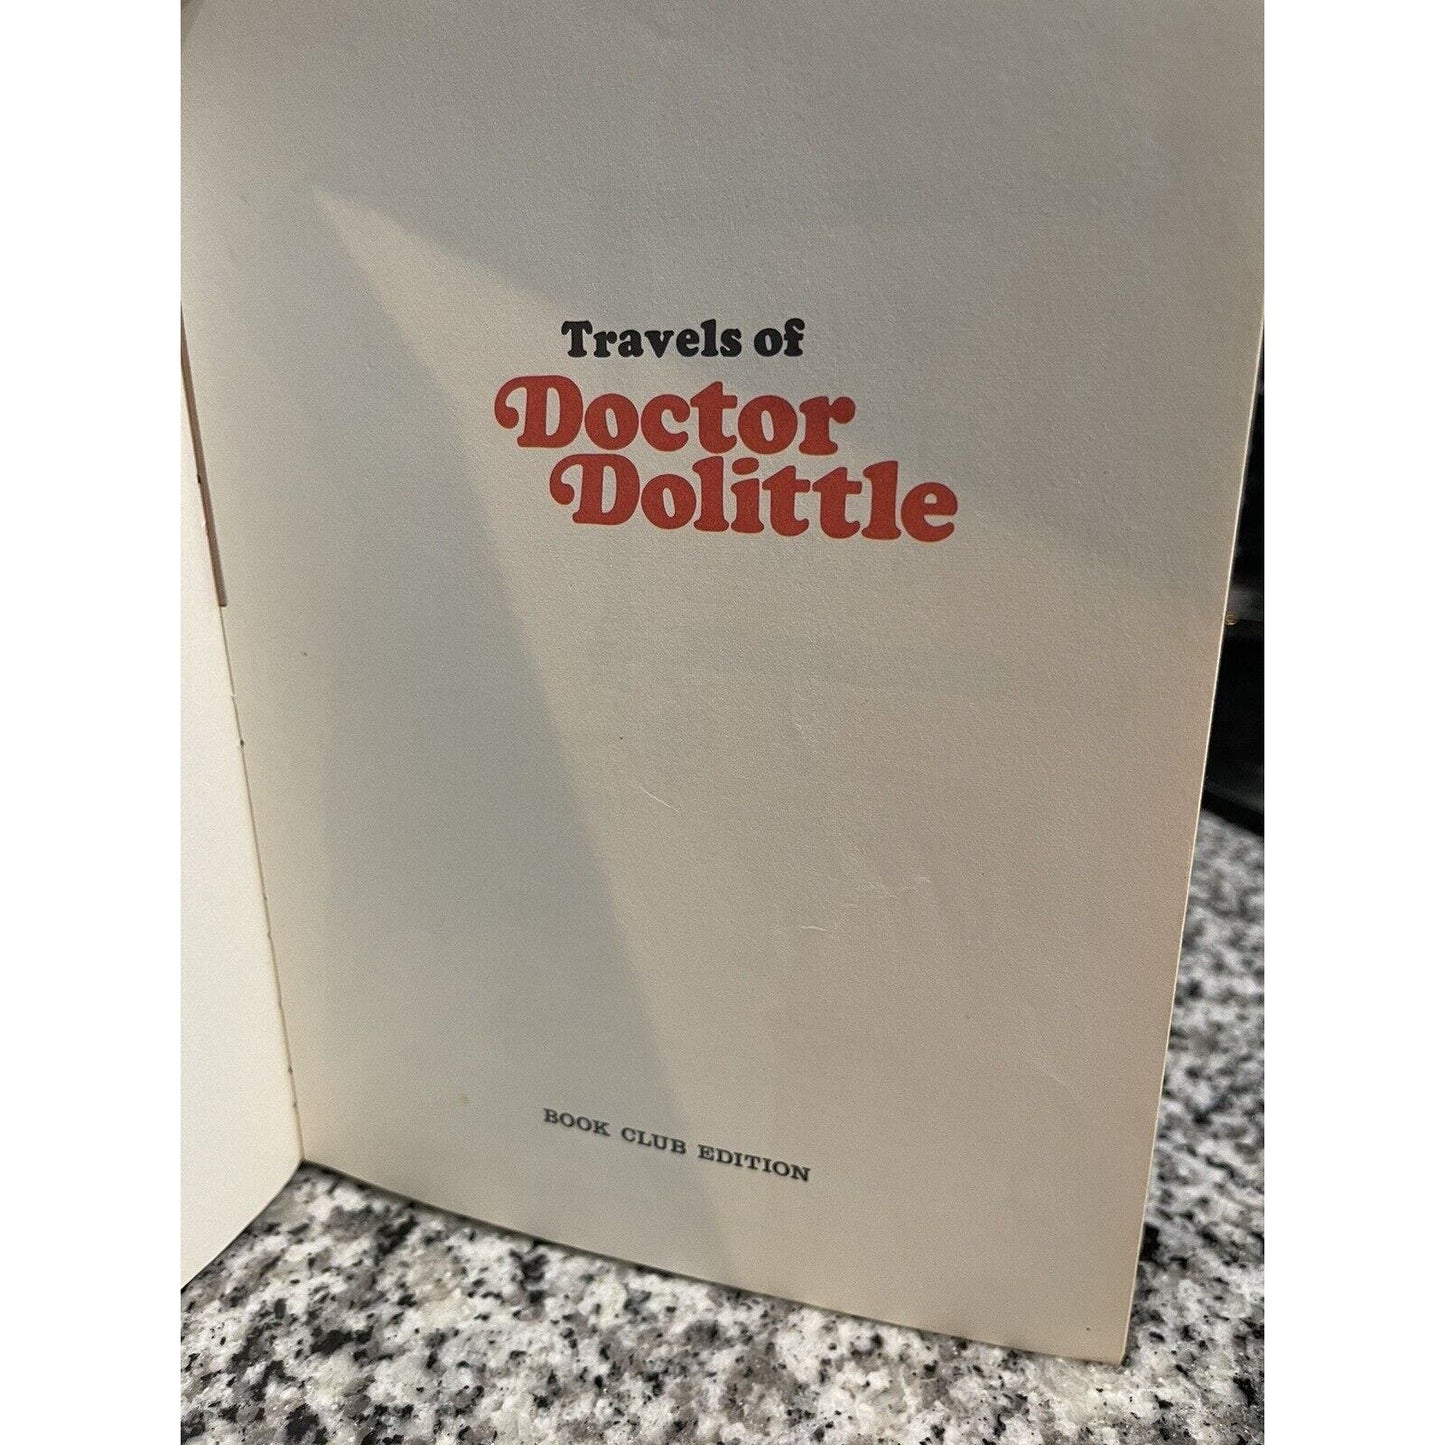 1967 Vintage Book Club Ed "Travel's Of Dr. Dolittle" by Philip Wende - Dr. Seuss